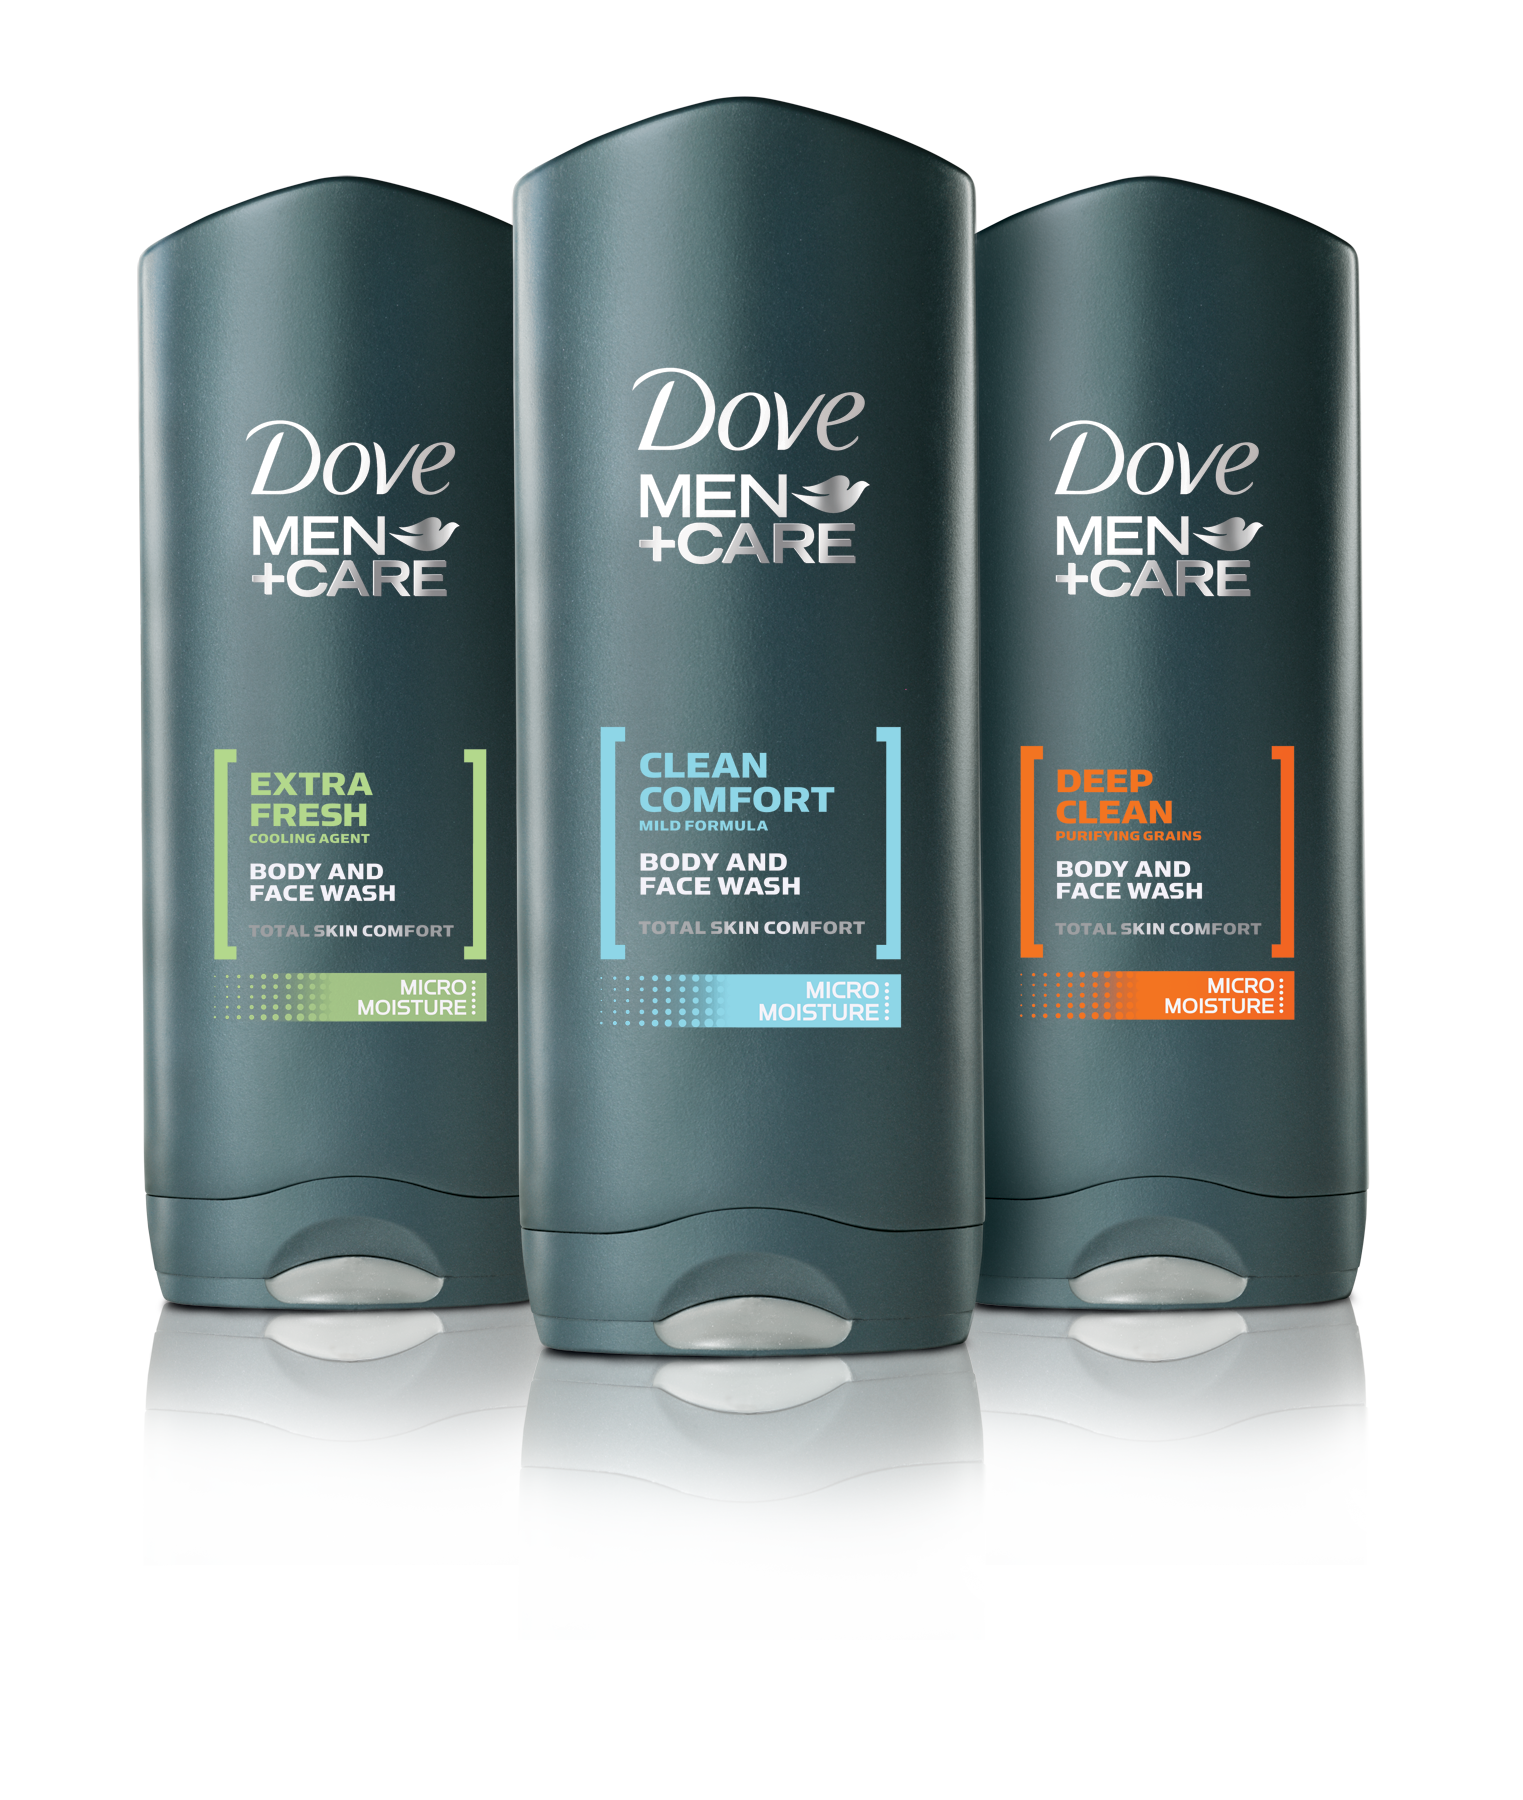 Dove Men+Care Body Wash as Low as 0.87 at CVS! {10/19} Living Rich